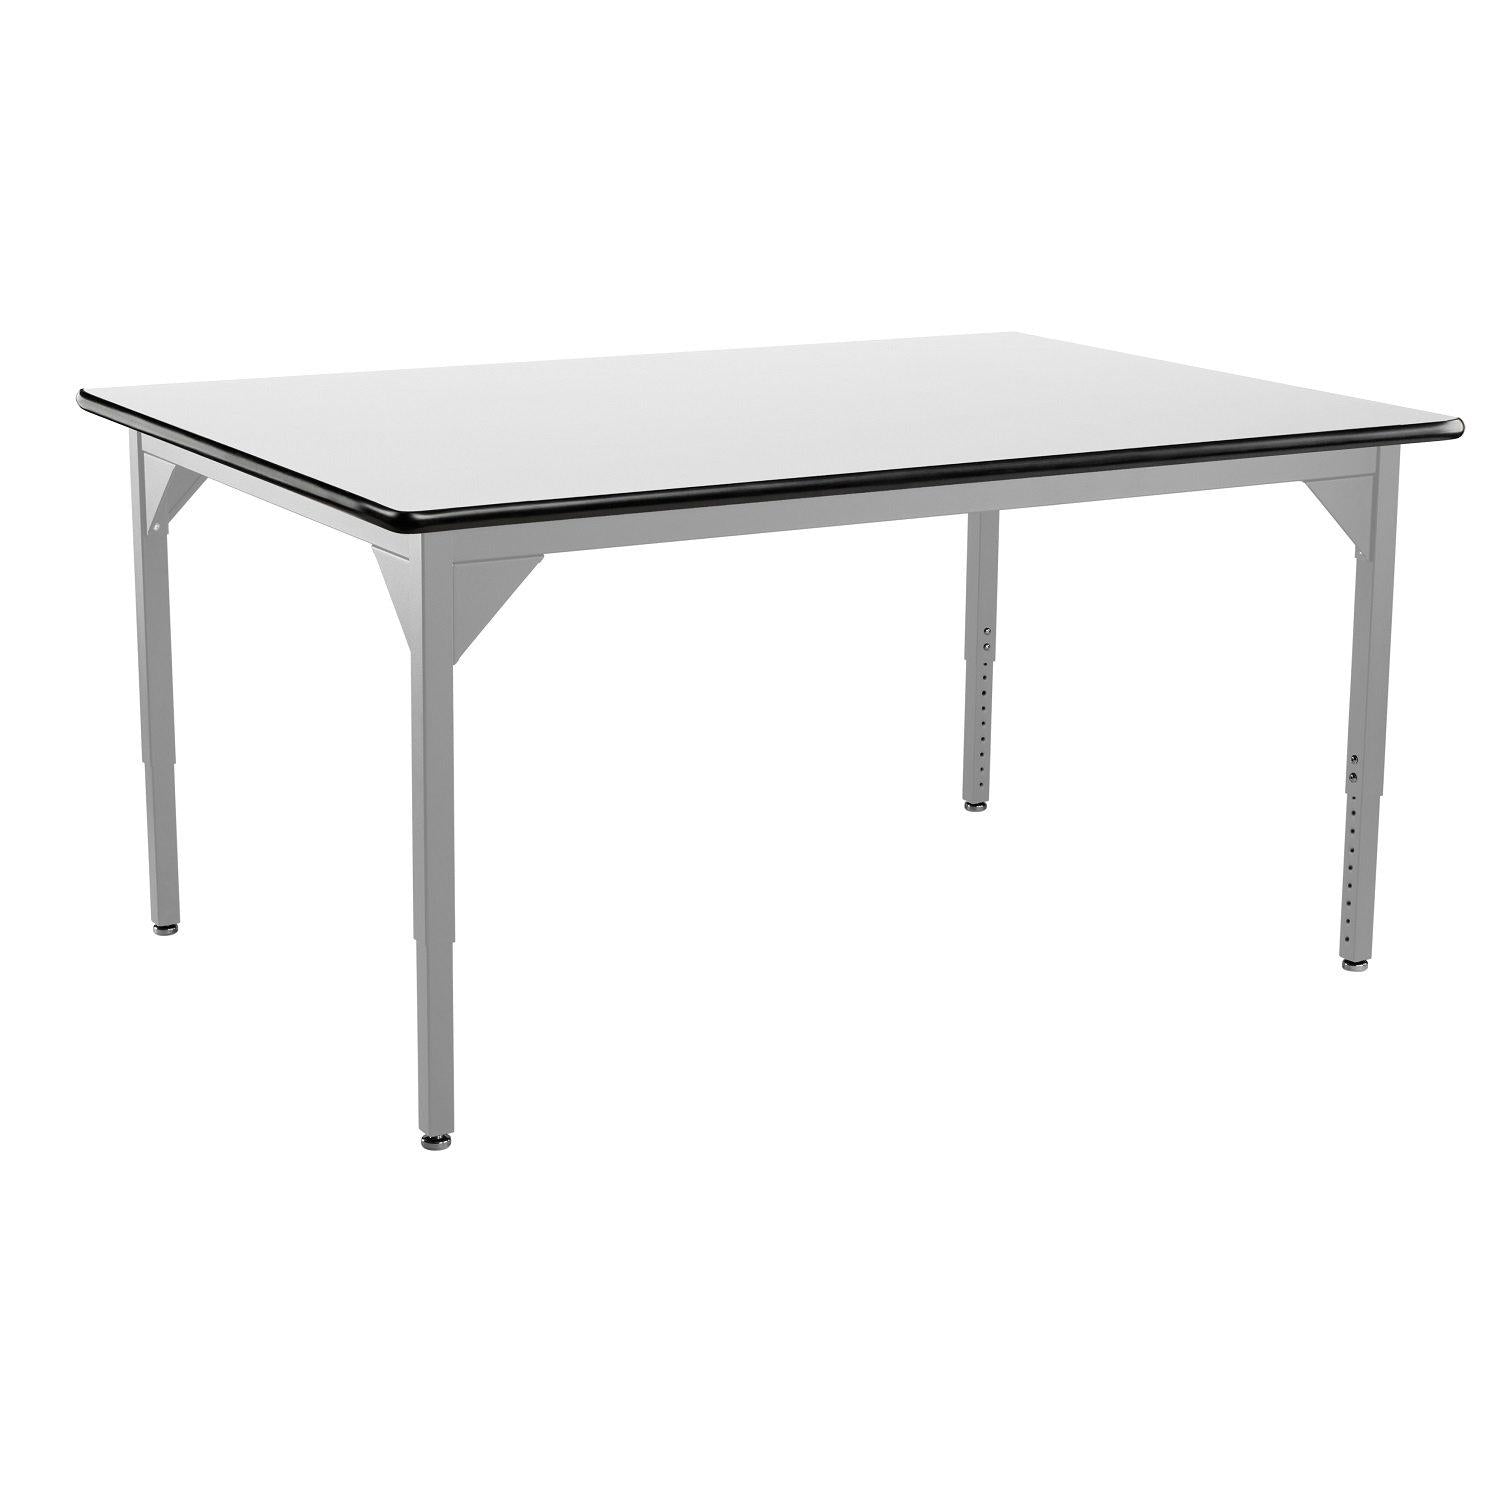 Heavy-Duty Height-Adjustable Utility Table, Soft Grey Frame, 48" x 48", Whiteboard High-Pressure Laminate Top